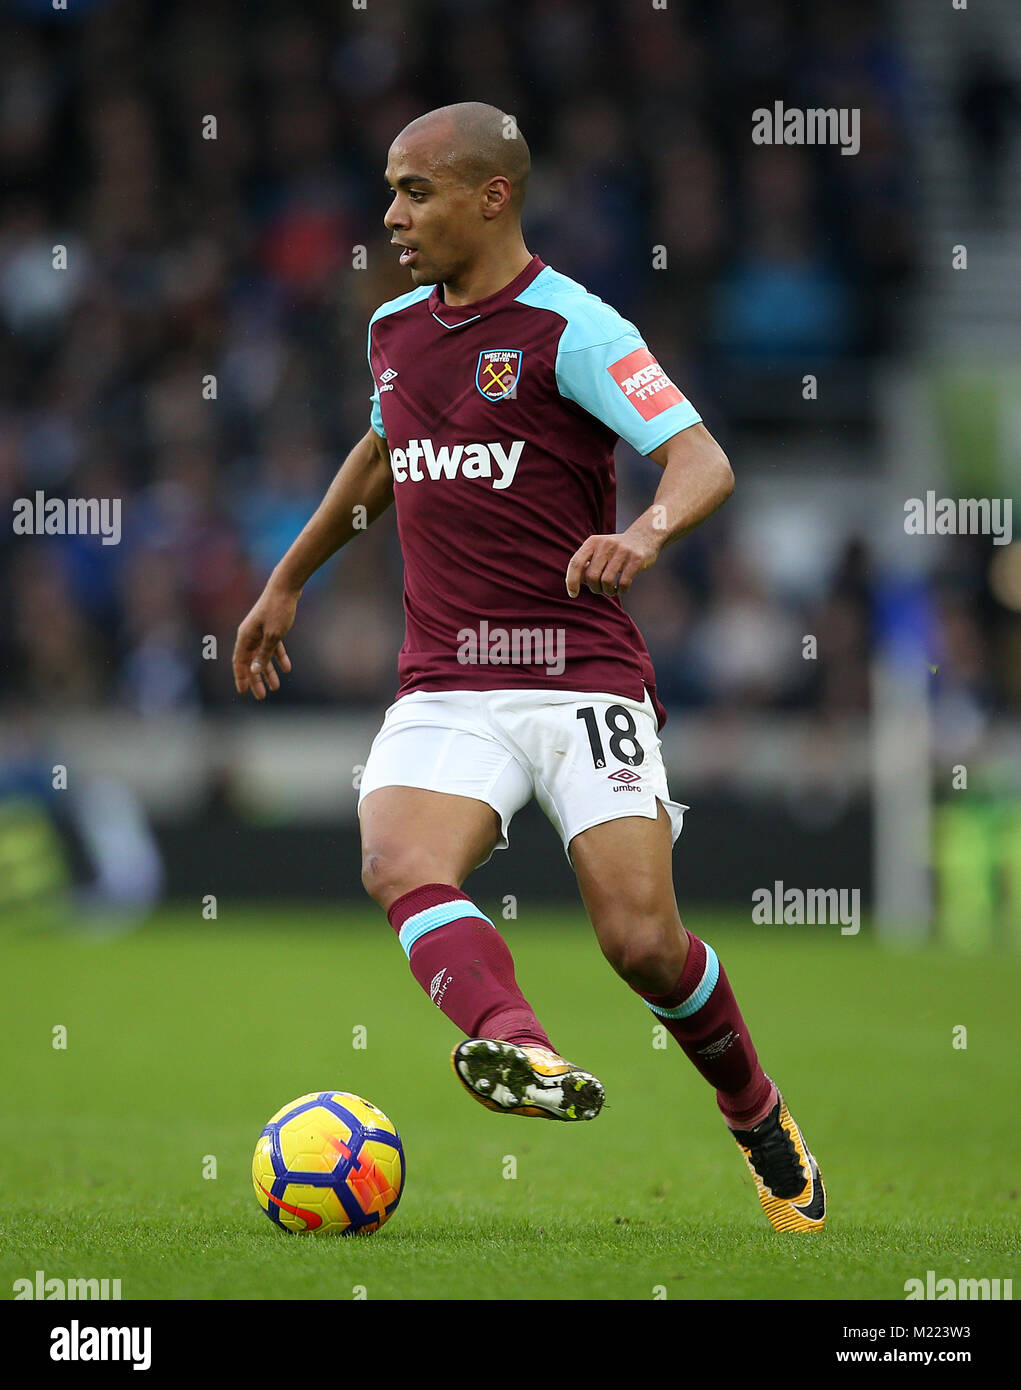 West Ham United's Joao Mario in action during the Premier League match at the AMEX Stadium, Brighton. PRESS ASSOCIATION Photo. Picture date: Saturday February 3, 2018. See PA story SOCCER Brighton. Photo credit should read: Steven Paston/PA Wire. RESTRICTIONS: No use with unauthorised audio, video, data, fixture lists, club/league logos or 'live' services. Online in-match use limited to 75 images, no video emulation. No use in betting, games or single club/league/player publications. Stock Photo